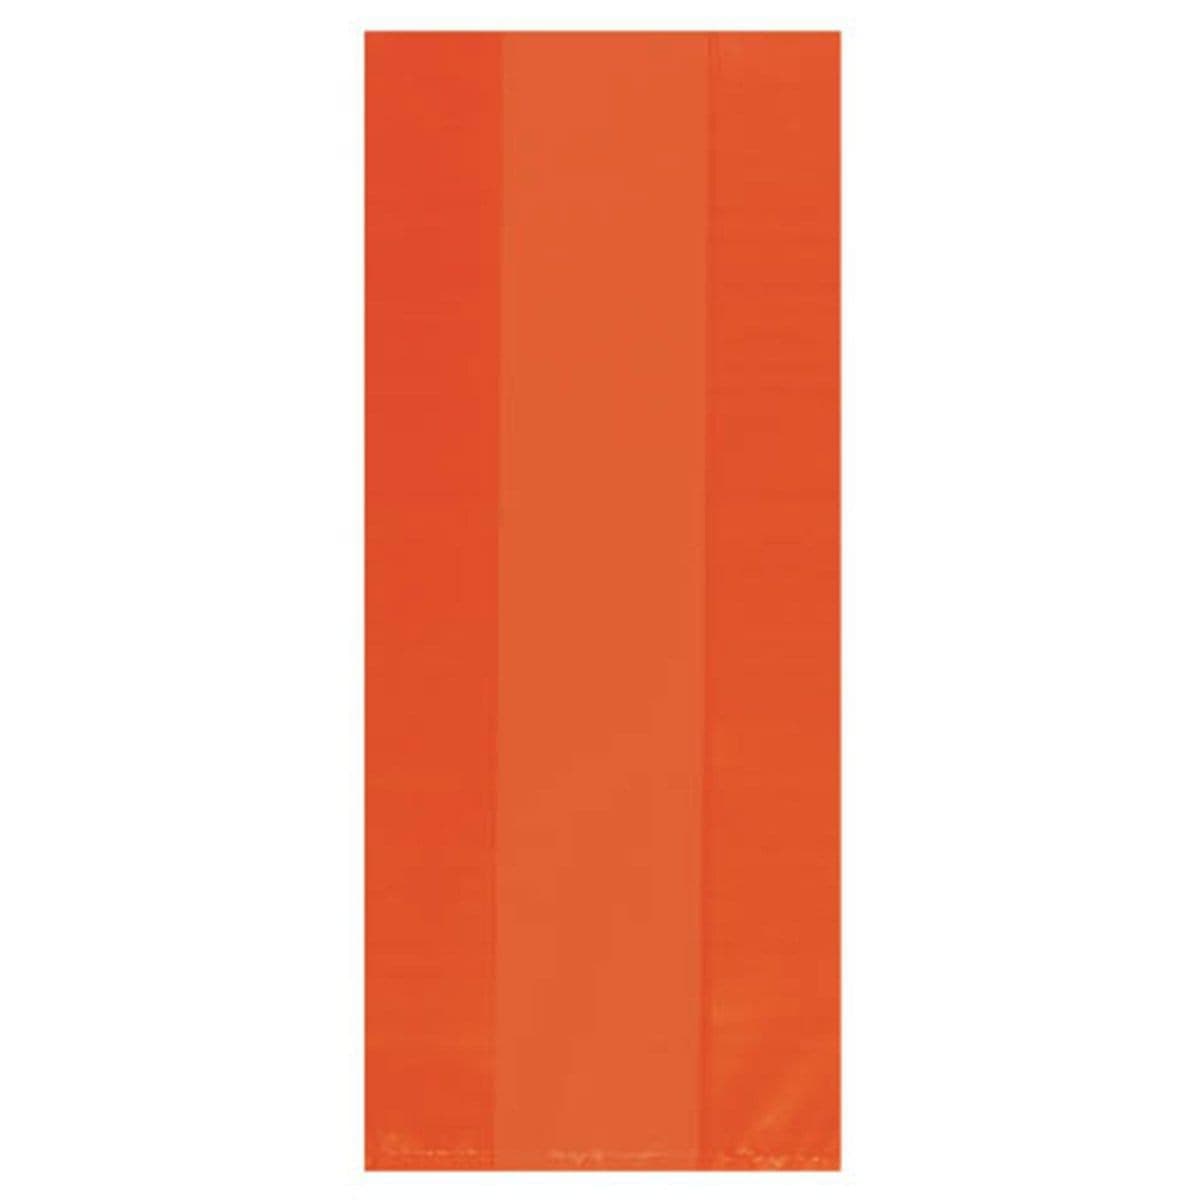 Buy Party Supplies Cello Bags - Orange 9.5 x 4 x 2.25 in. 25/pkg sold at Party Expert